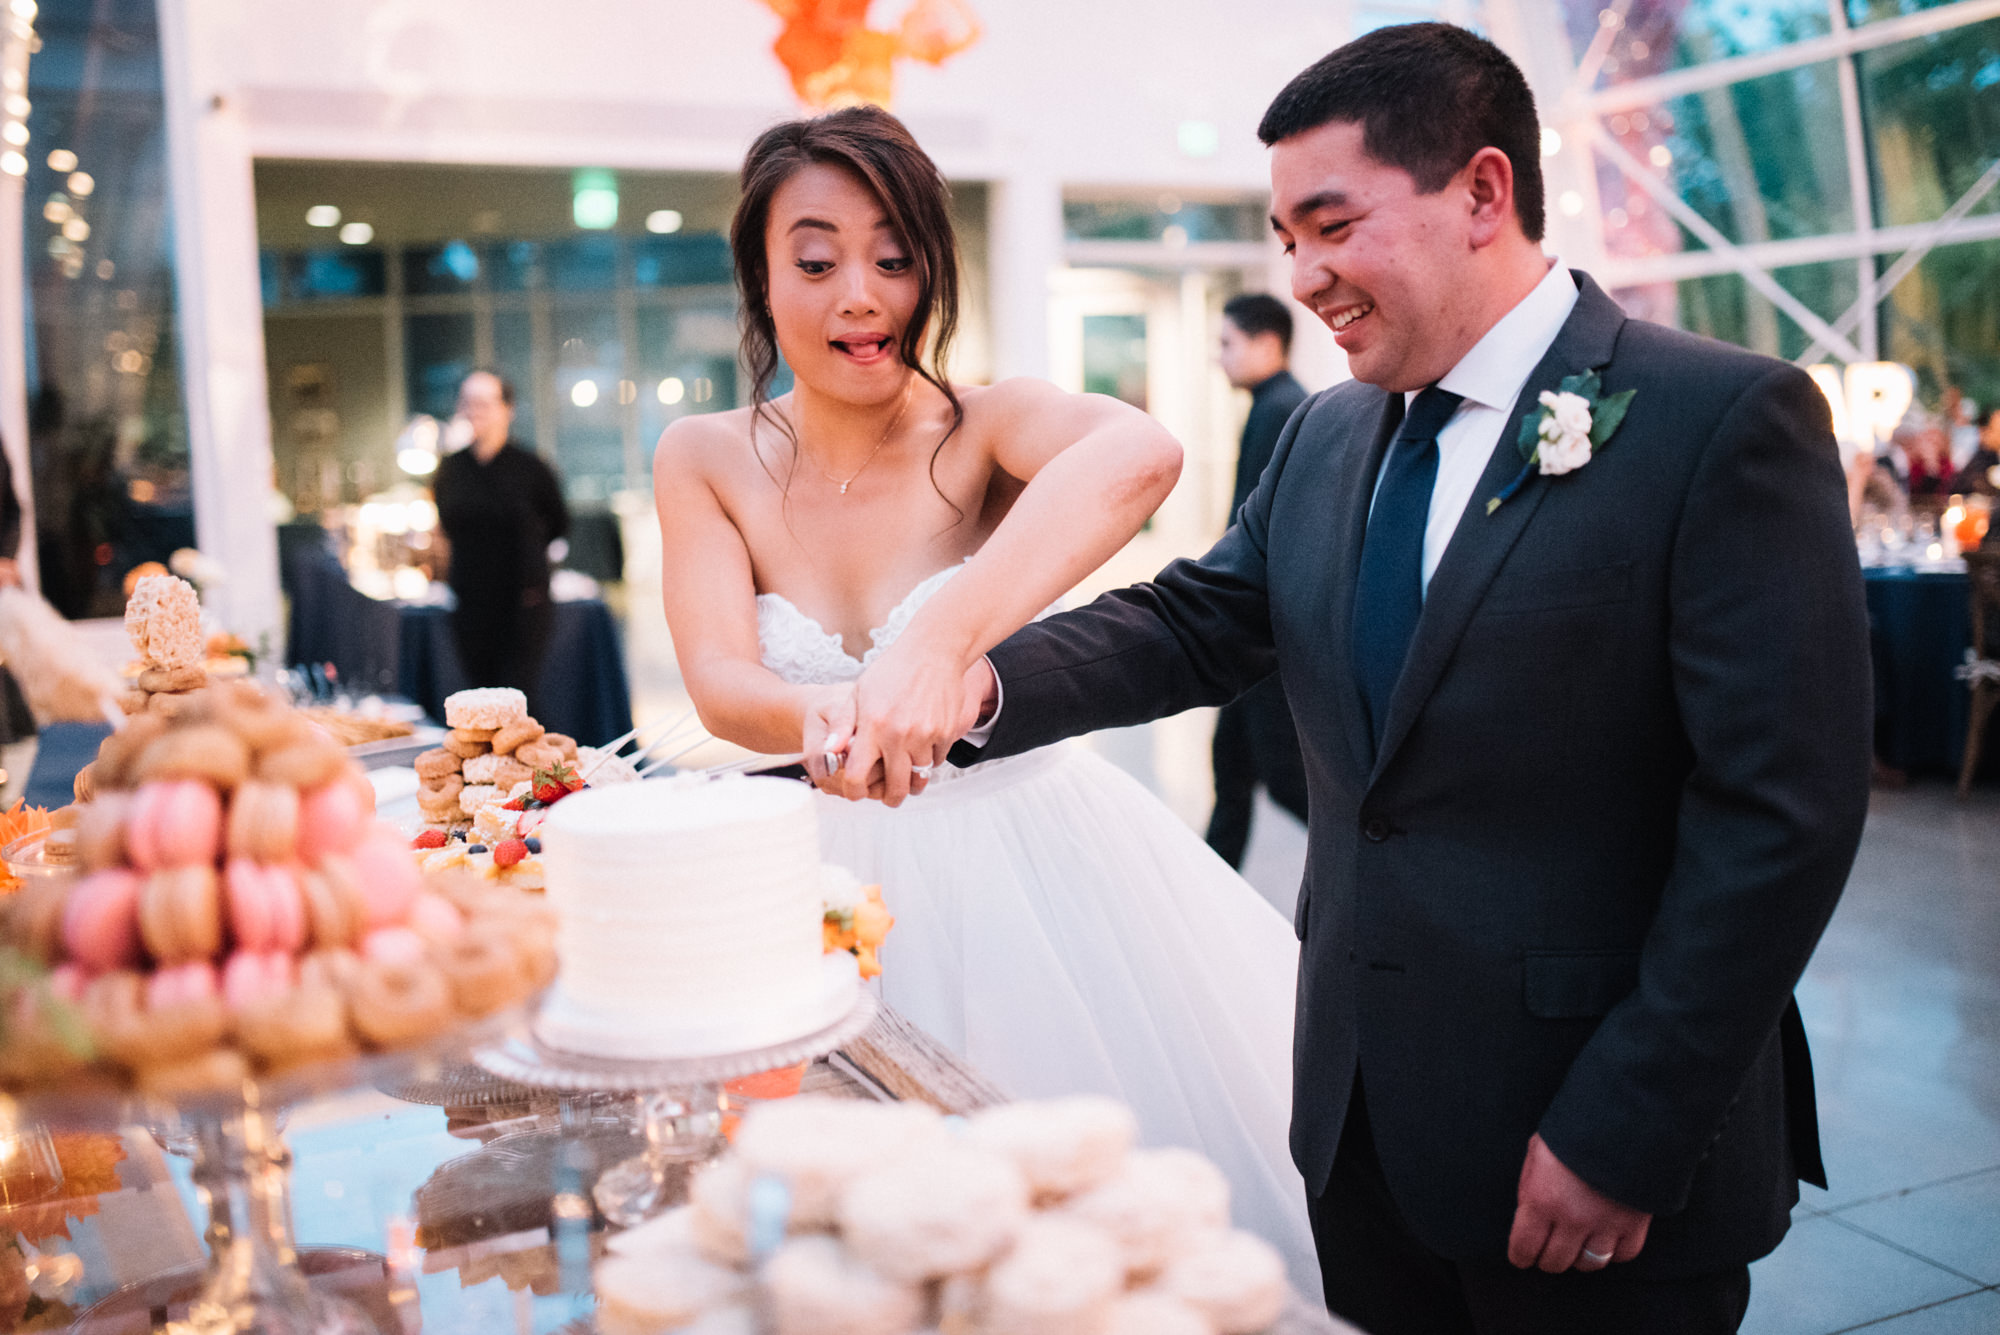 Amy and Jeremy cut their wedding cake at their wedding reception at Chihuly Garden and Glass